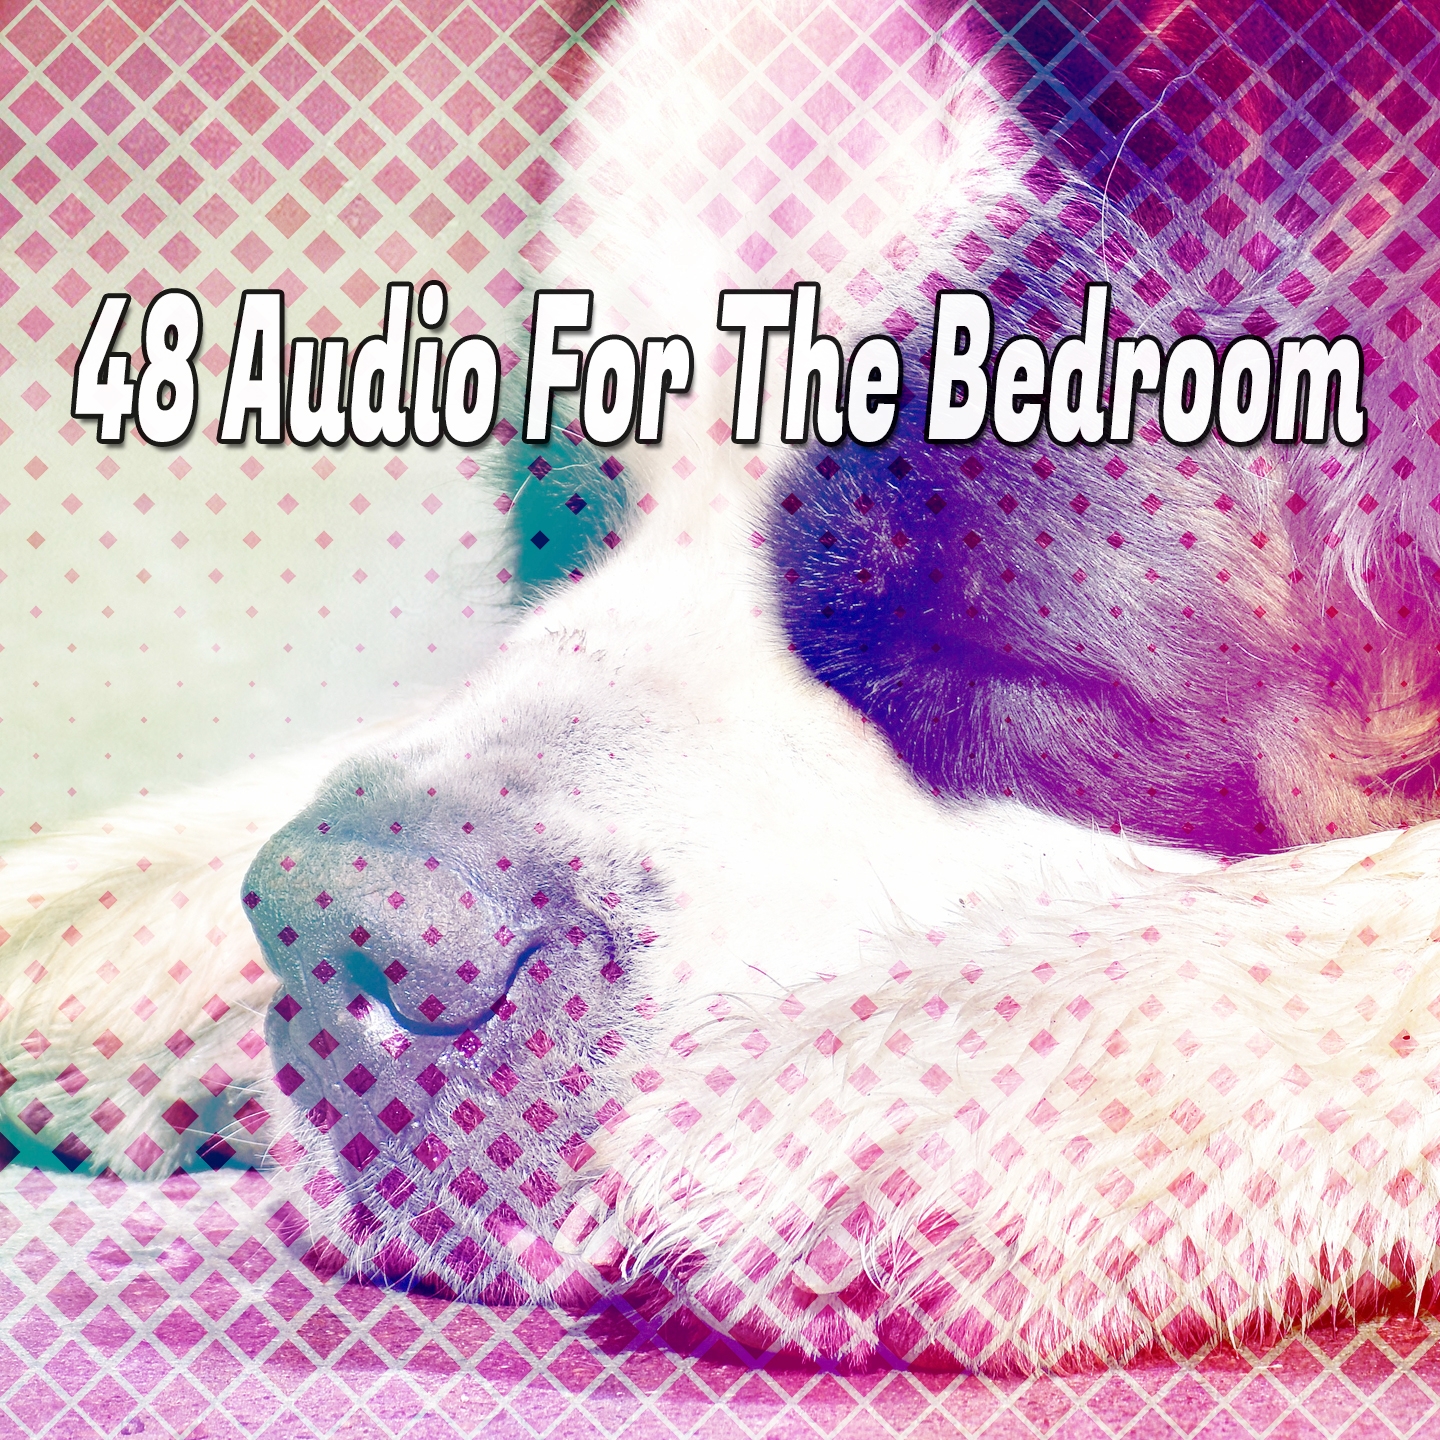 48 Audio For The Bedroom